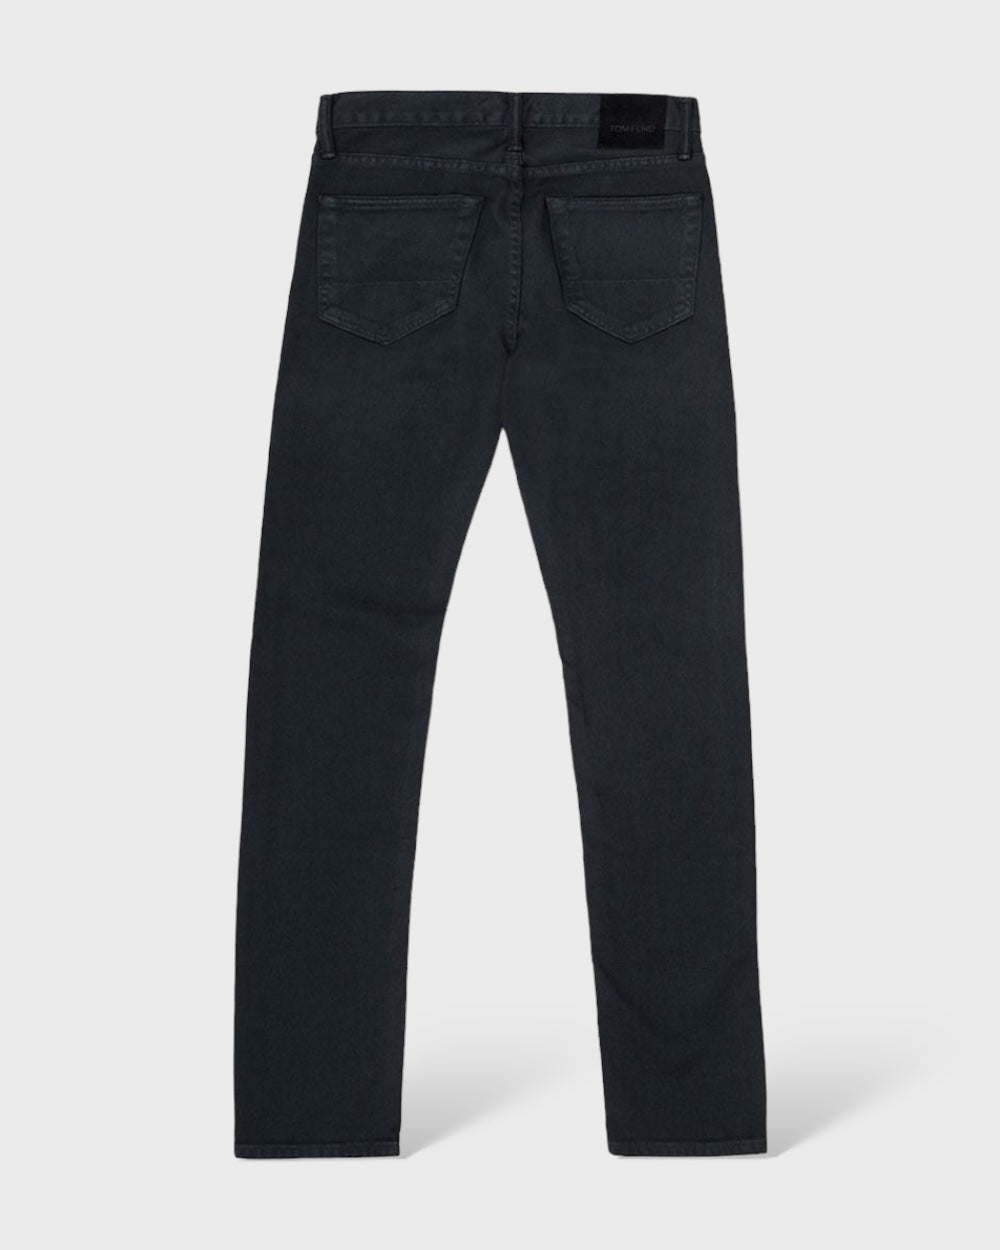 Tom Ford Anthracite Jeans Pants